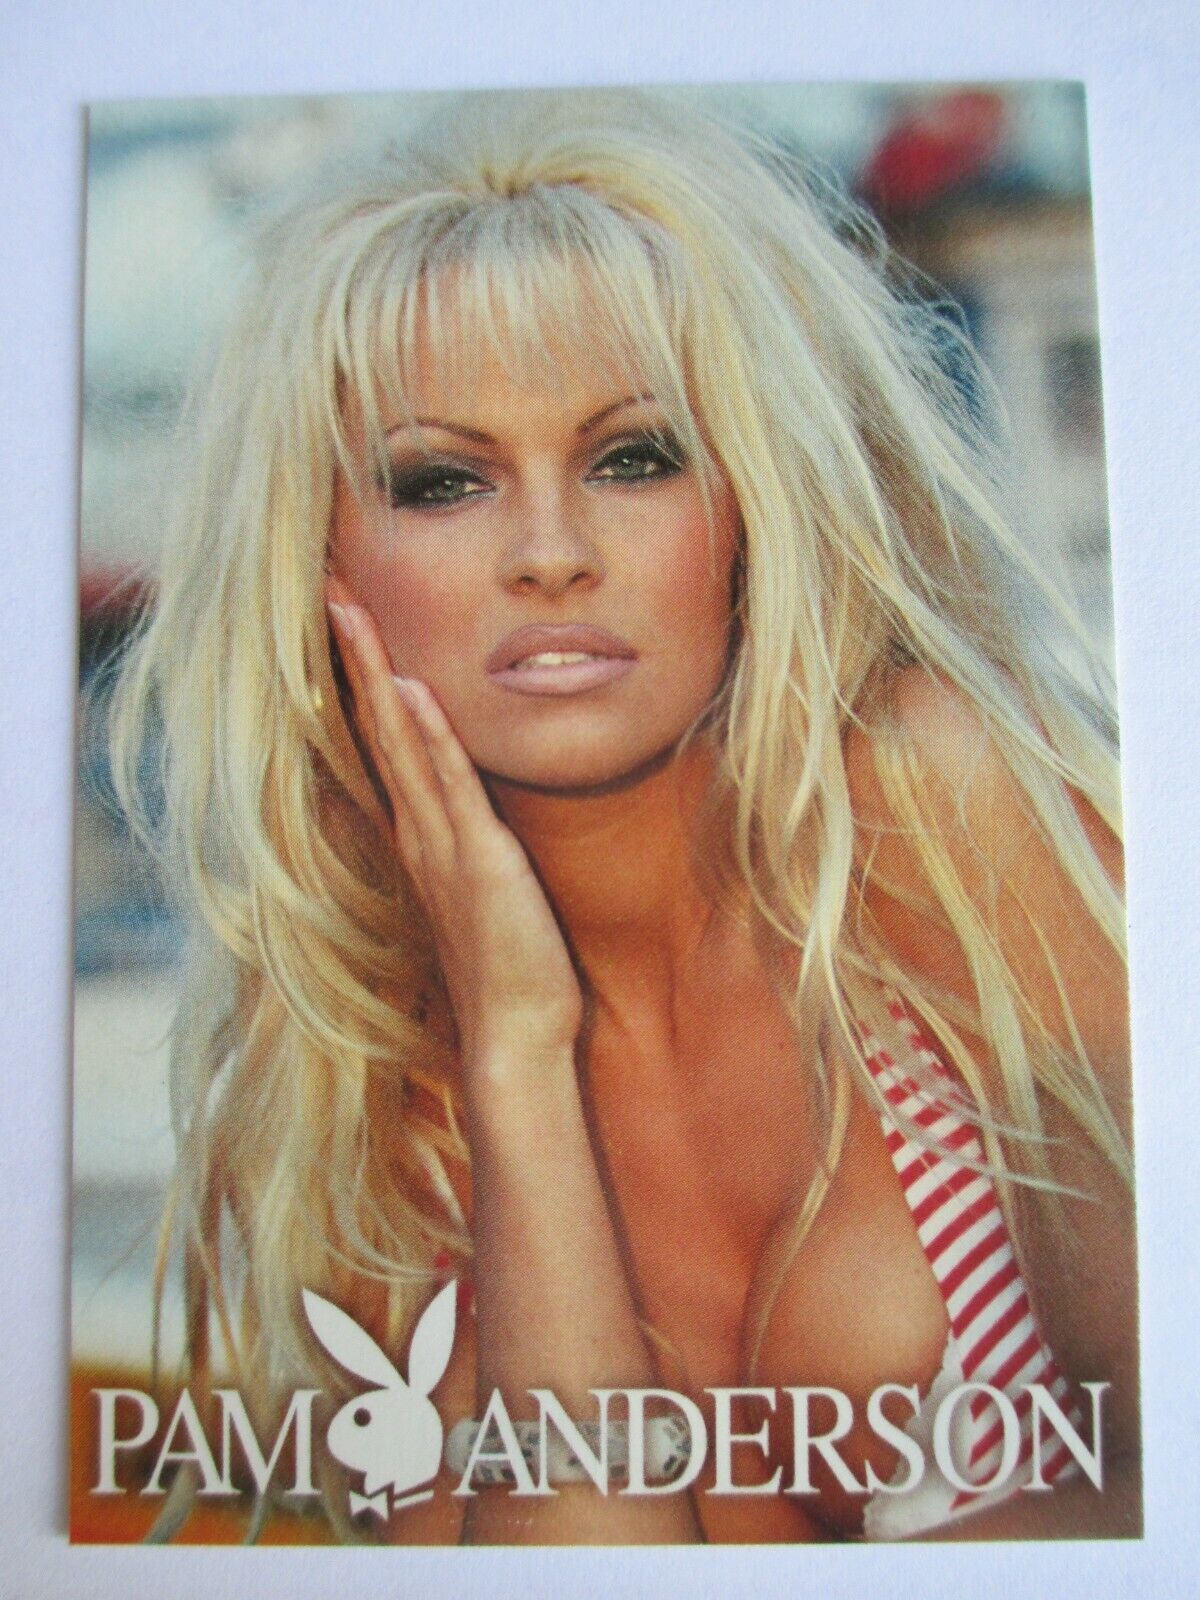 Pam Anderson Playboy Cards U Pick the card # Listed and Quantities 1.29 EACH